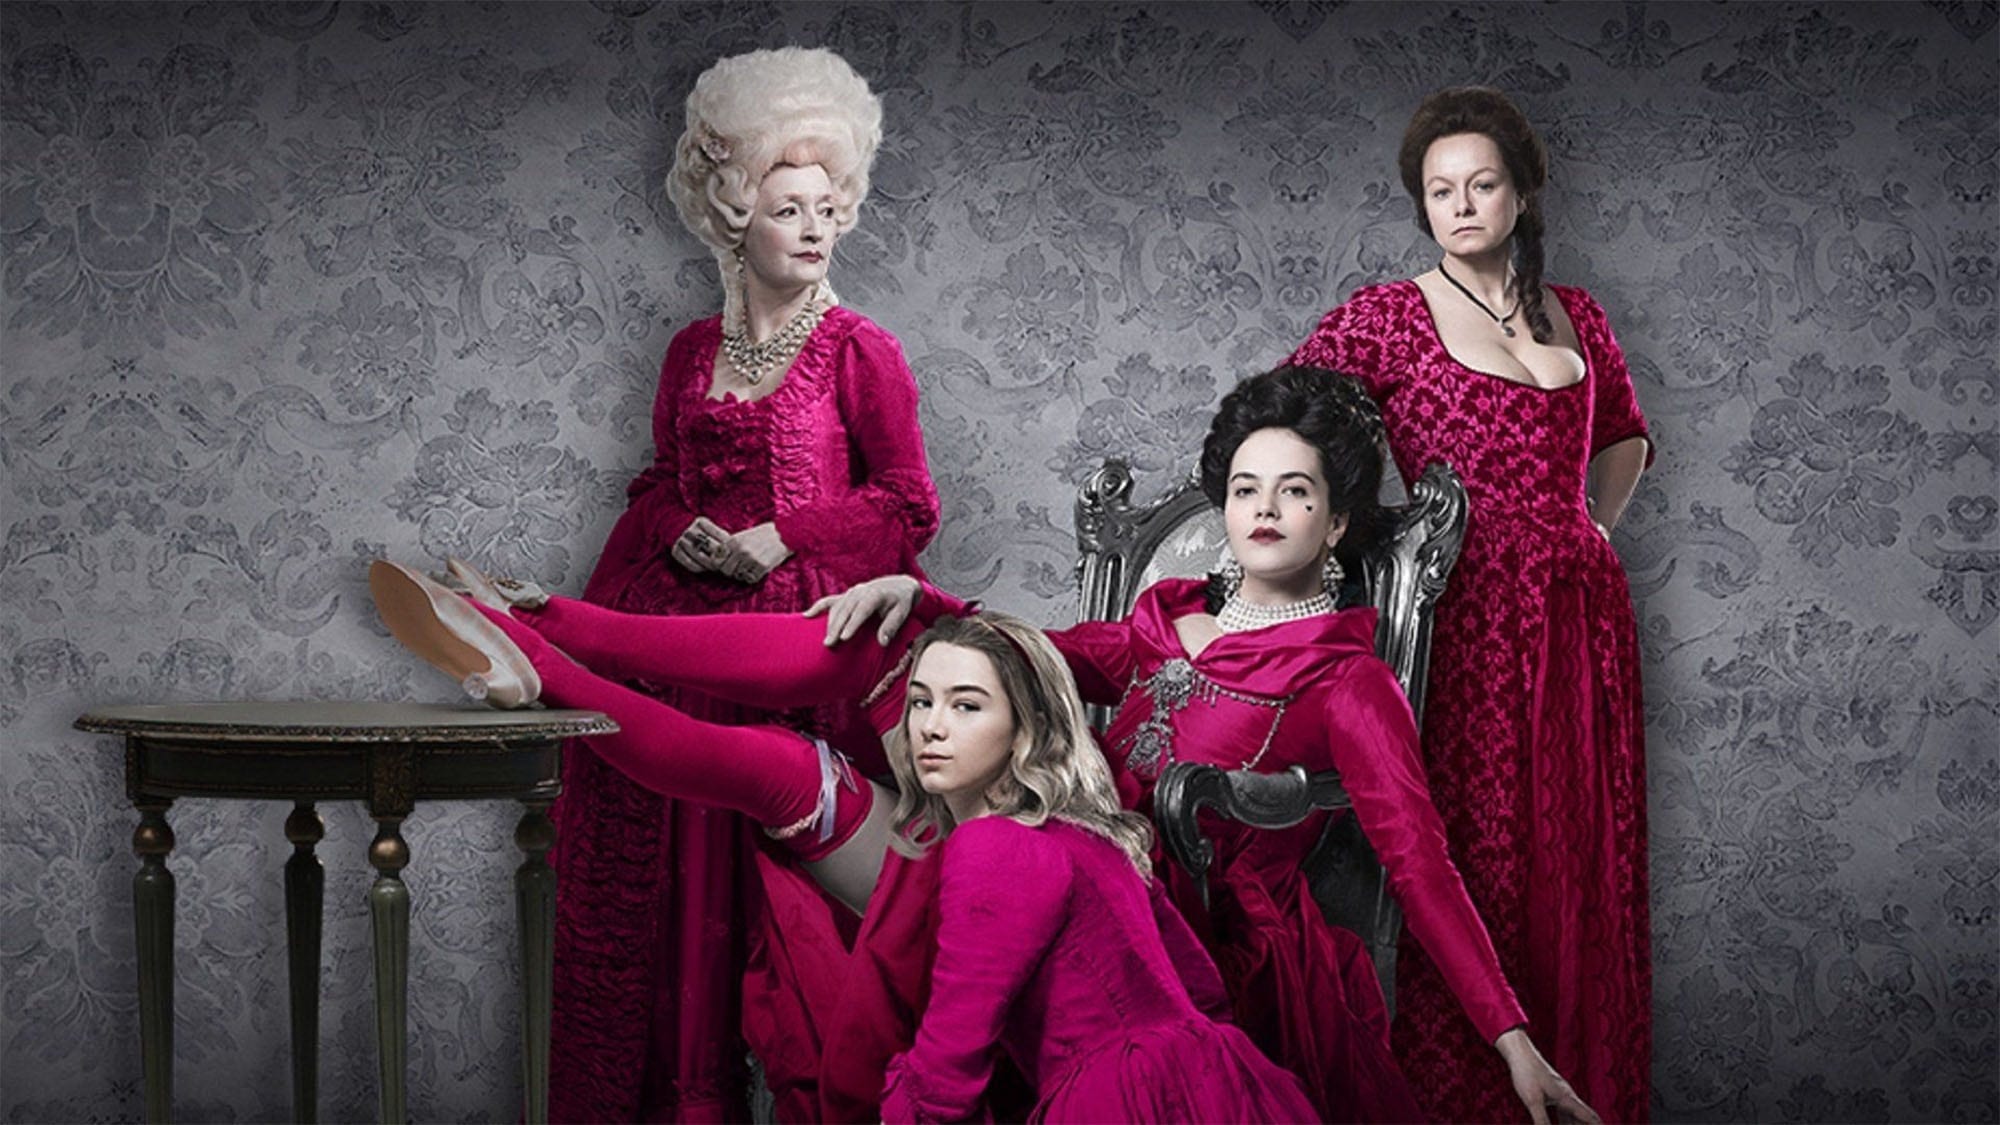 When madam Margaret's daughter Charlotte goes to arch-rival bawd Lydia Quigley, their deep-set rivalry is taken to a dangerous new level in 'Harlots'.